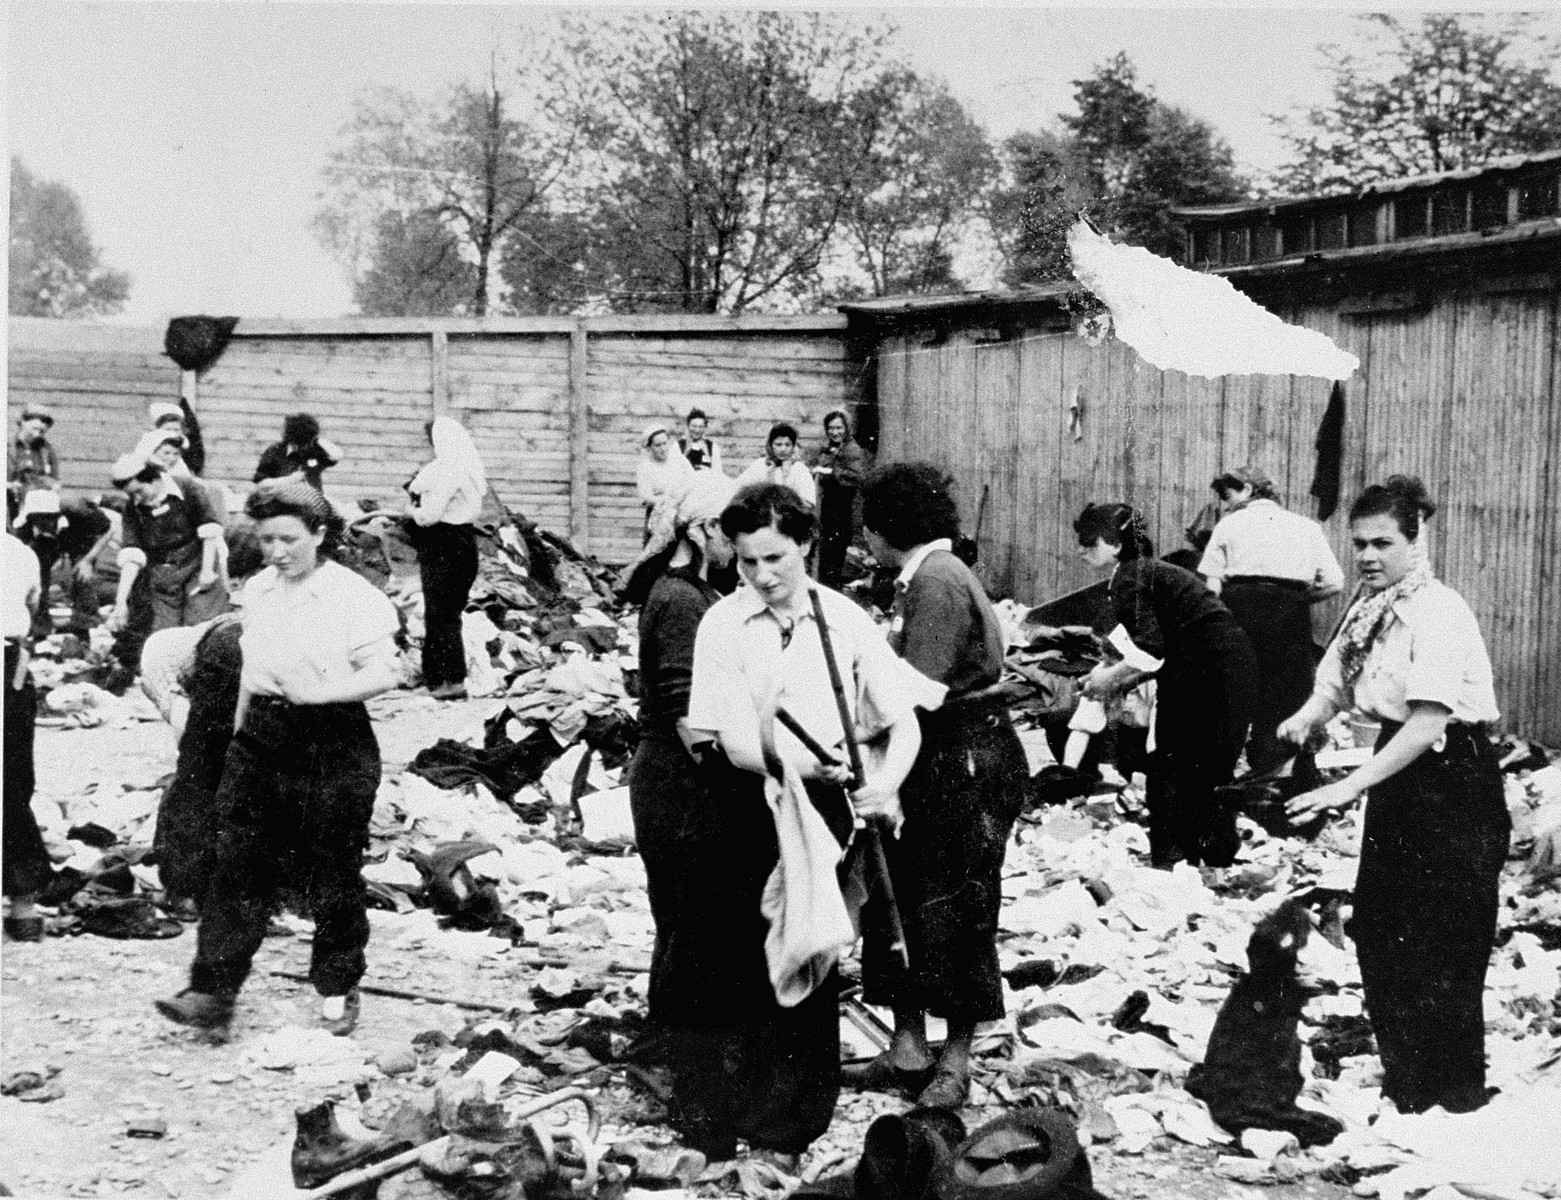 Female prisoners in the Aufräumungskommando (order commandos) sort the confiscated property of a transport of Jews from Subcarpathian Rus at a warehouse in Auschwitz-Birkenau.

The camp prisoners came to refer to the looted property as "Kanada," associating it with the riches symbolized by Kanada.  The members of this commando were almost exclusively Jews.  "Kanada" storage facilities occupied several dozen barracks and other buildings around the camp.  The looted property was funneled from Auschwitz through an extensive distribution network that served many individuals and various economic branches of the Third Reich.